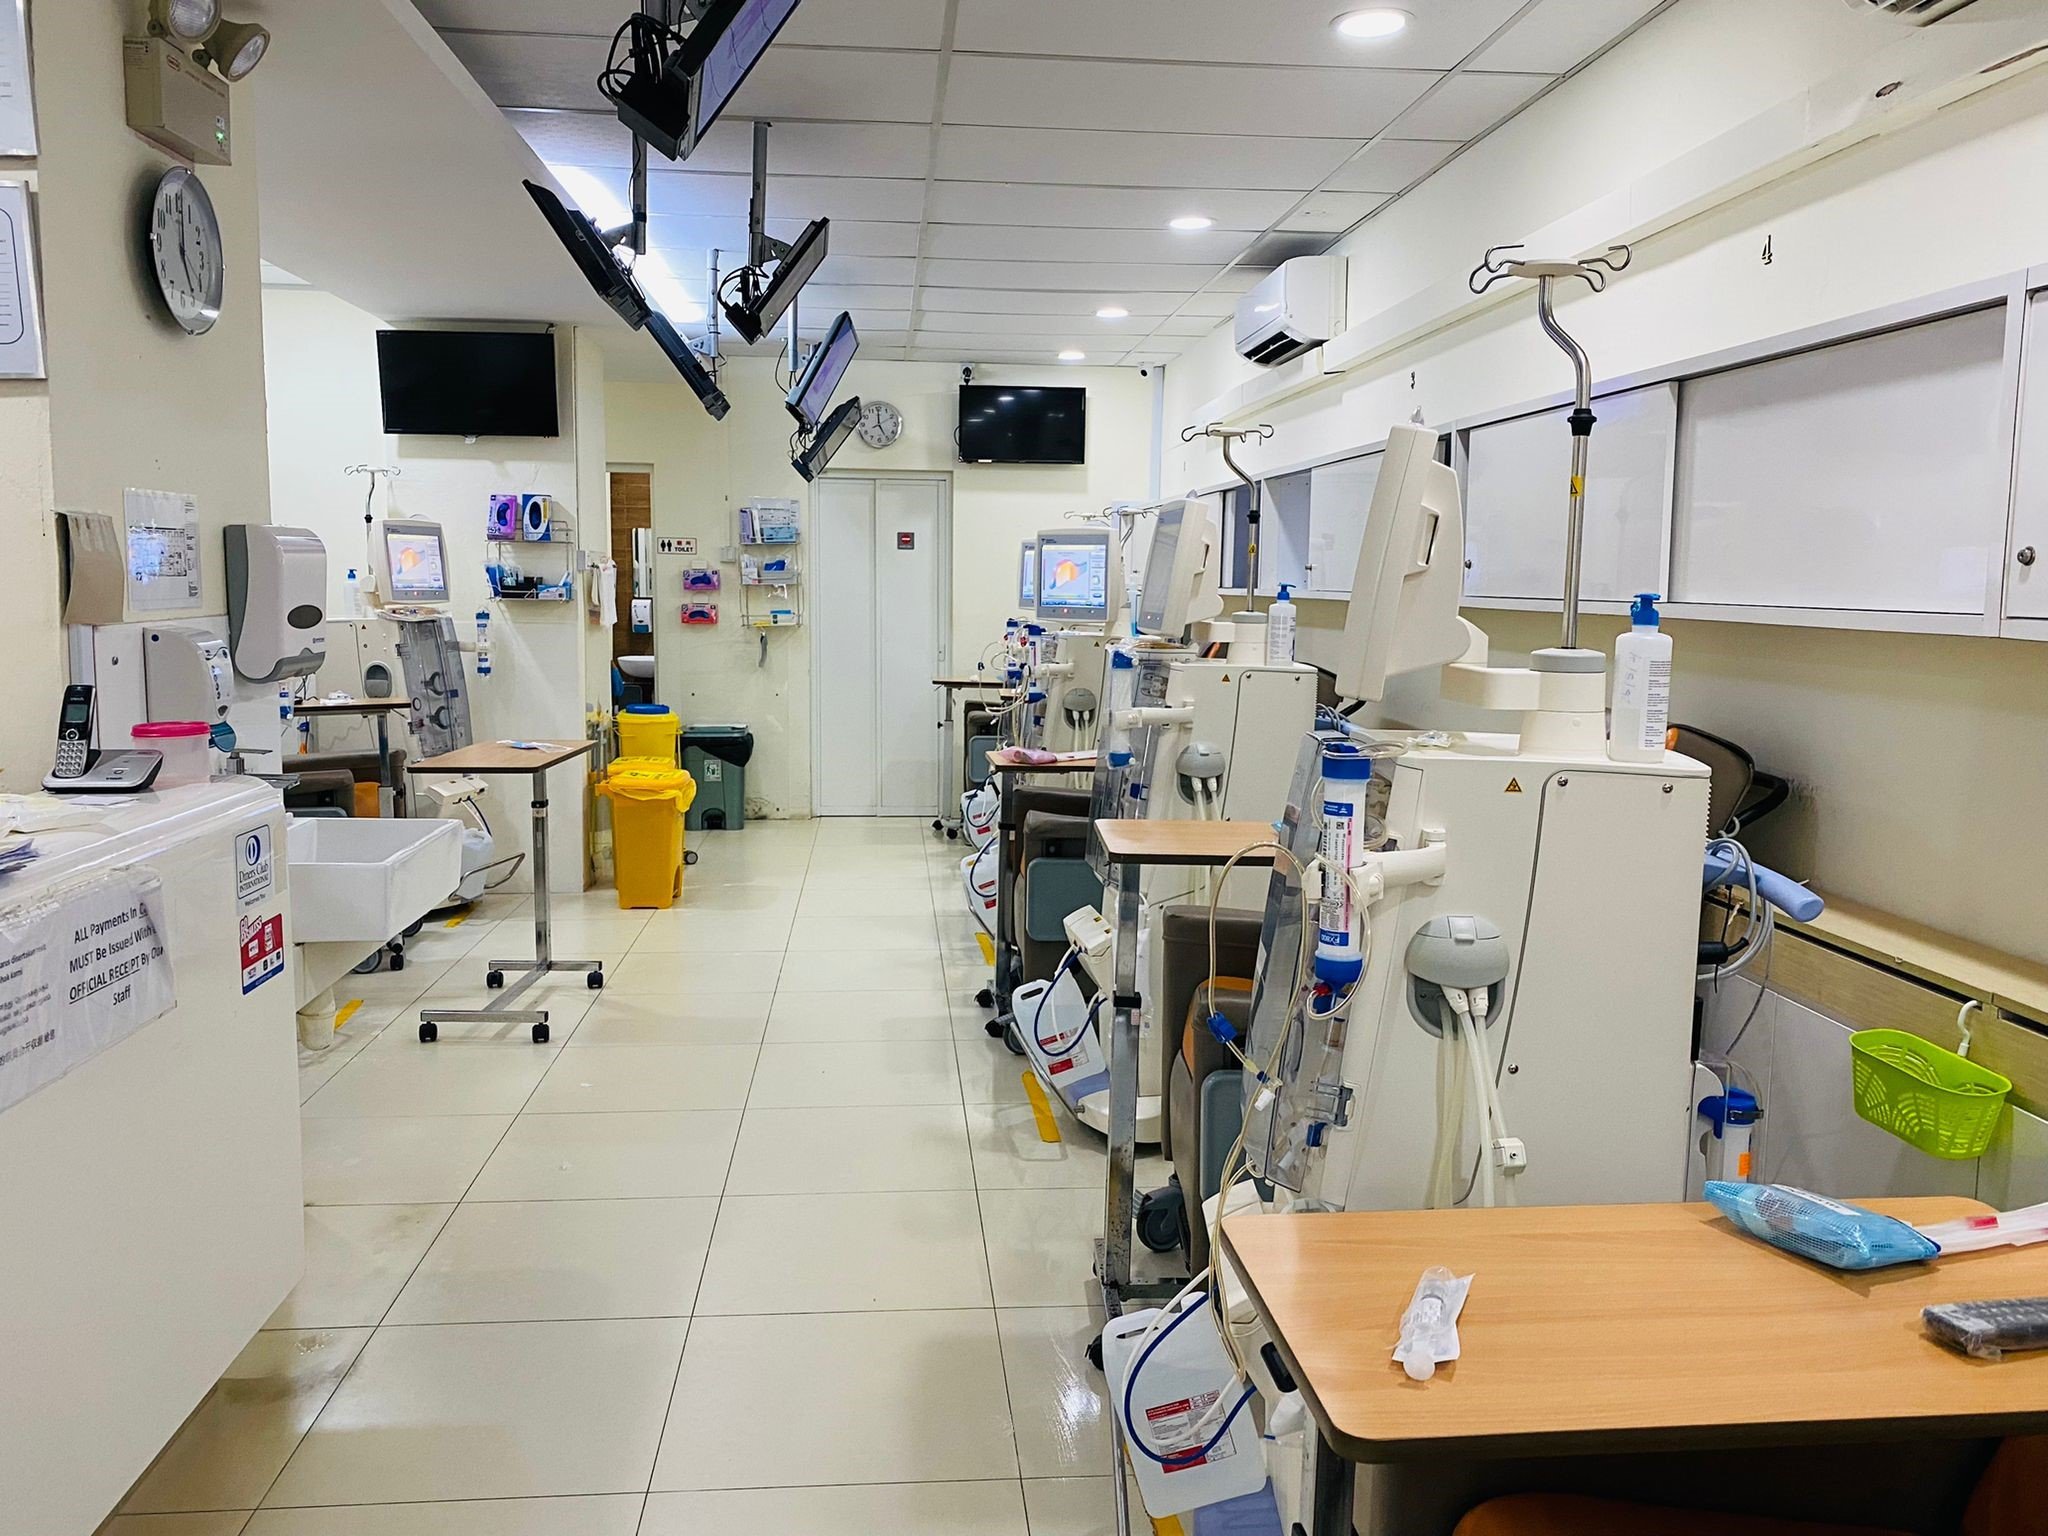 Fresenius Kidney Care Tampines West Dialysis Clinic